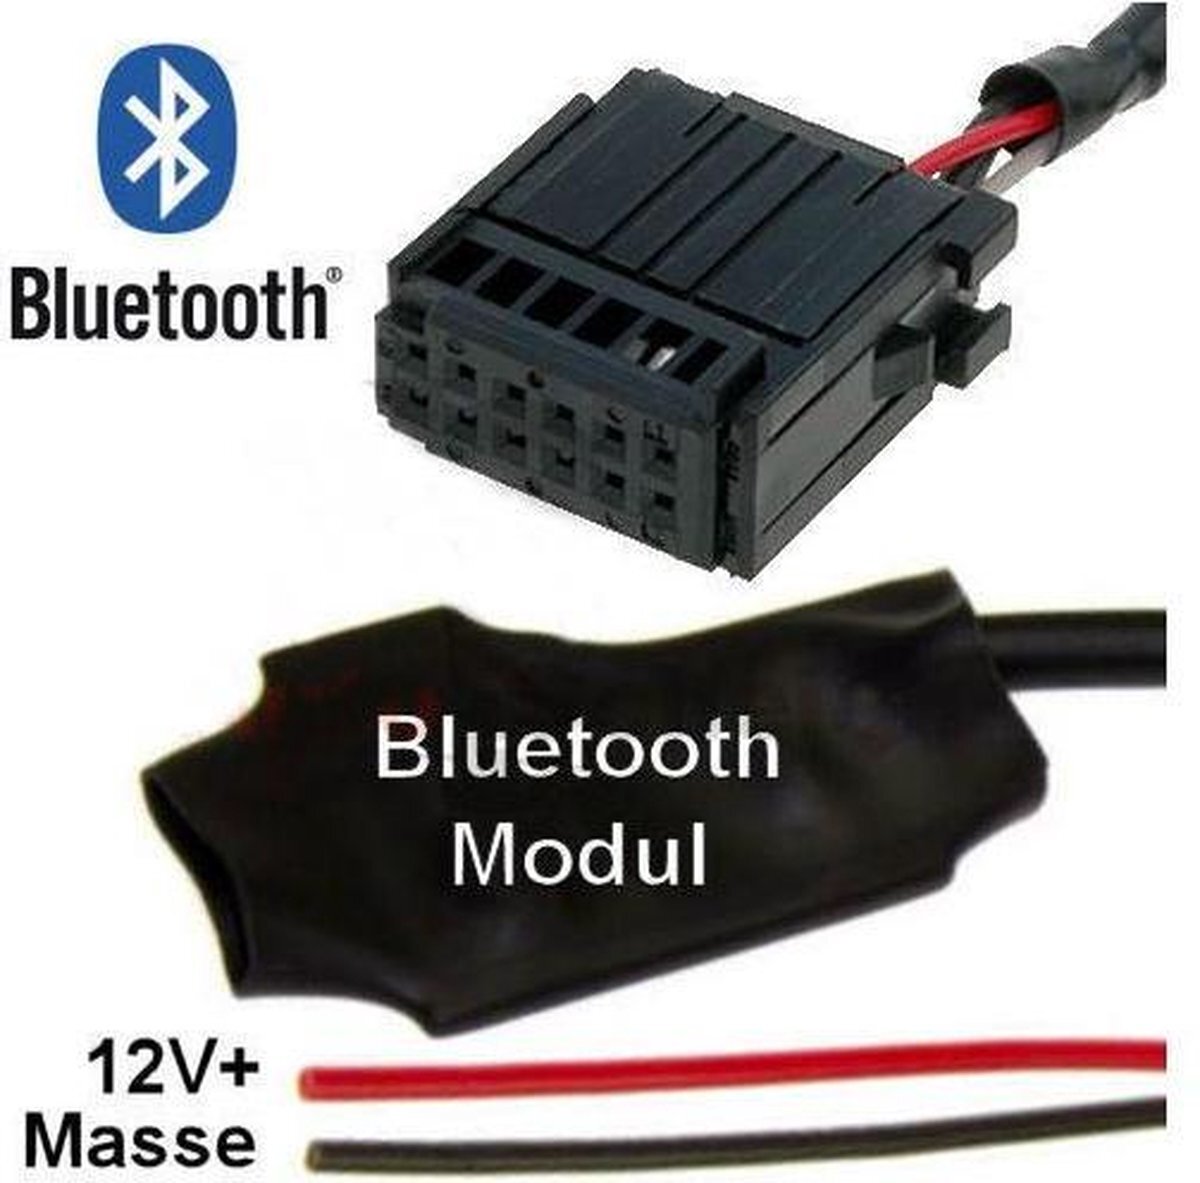 No Name Ford Bluetooth Audio Streaming Adapter Aux input kabel Cd 6000 Cd6000 Cd6006 Focus Fiesta Mondeo Torneo C max S max